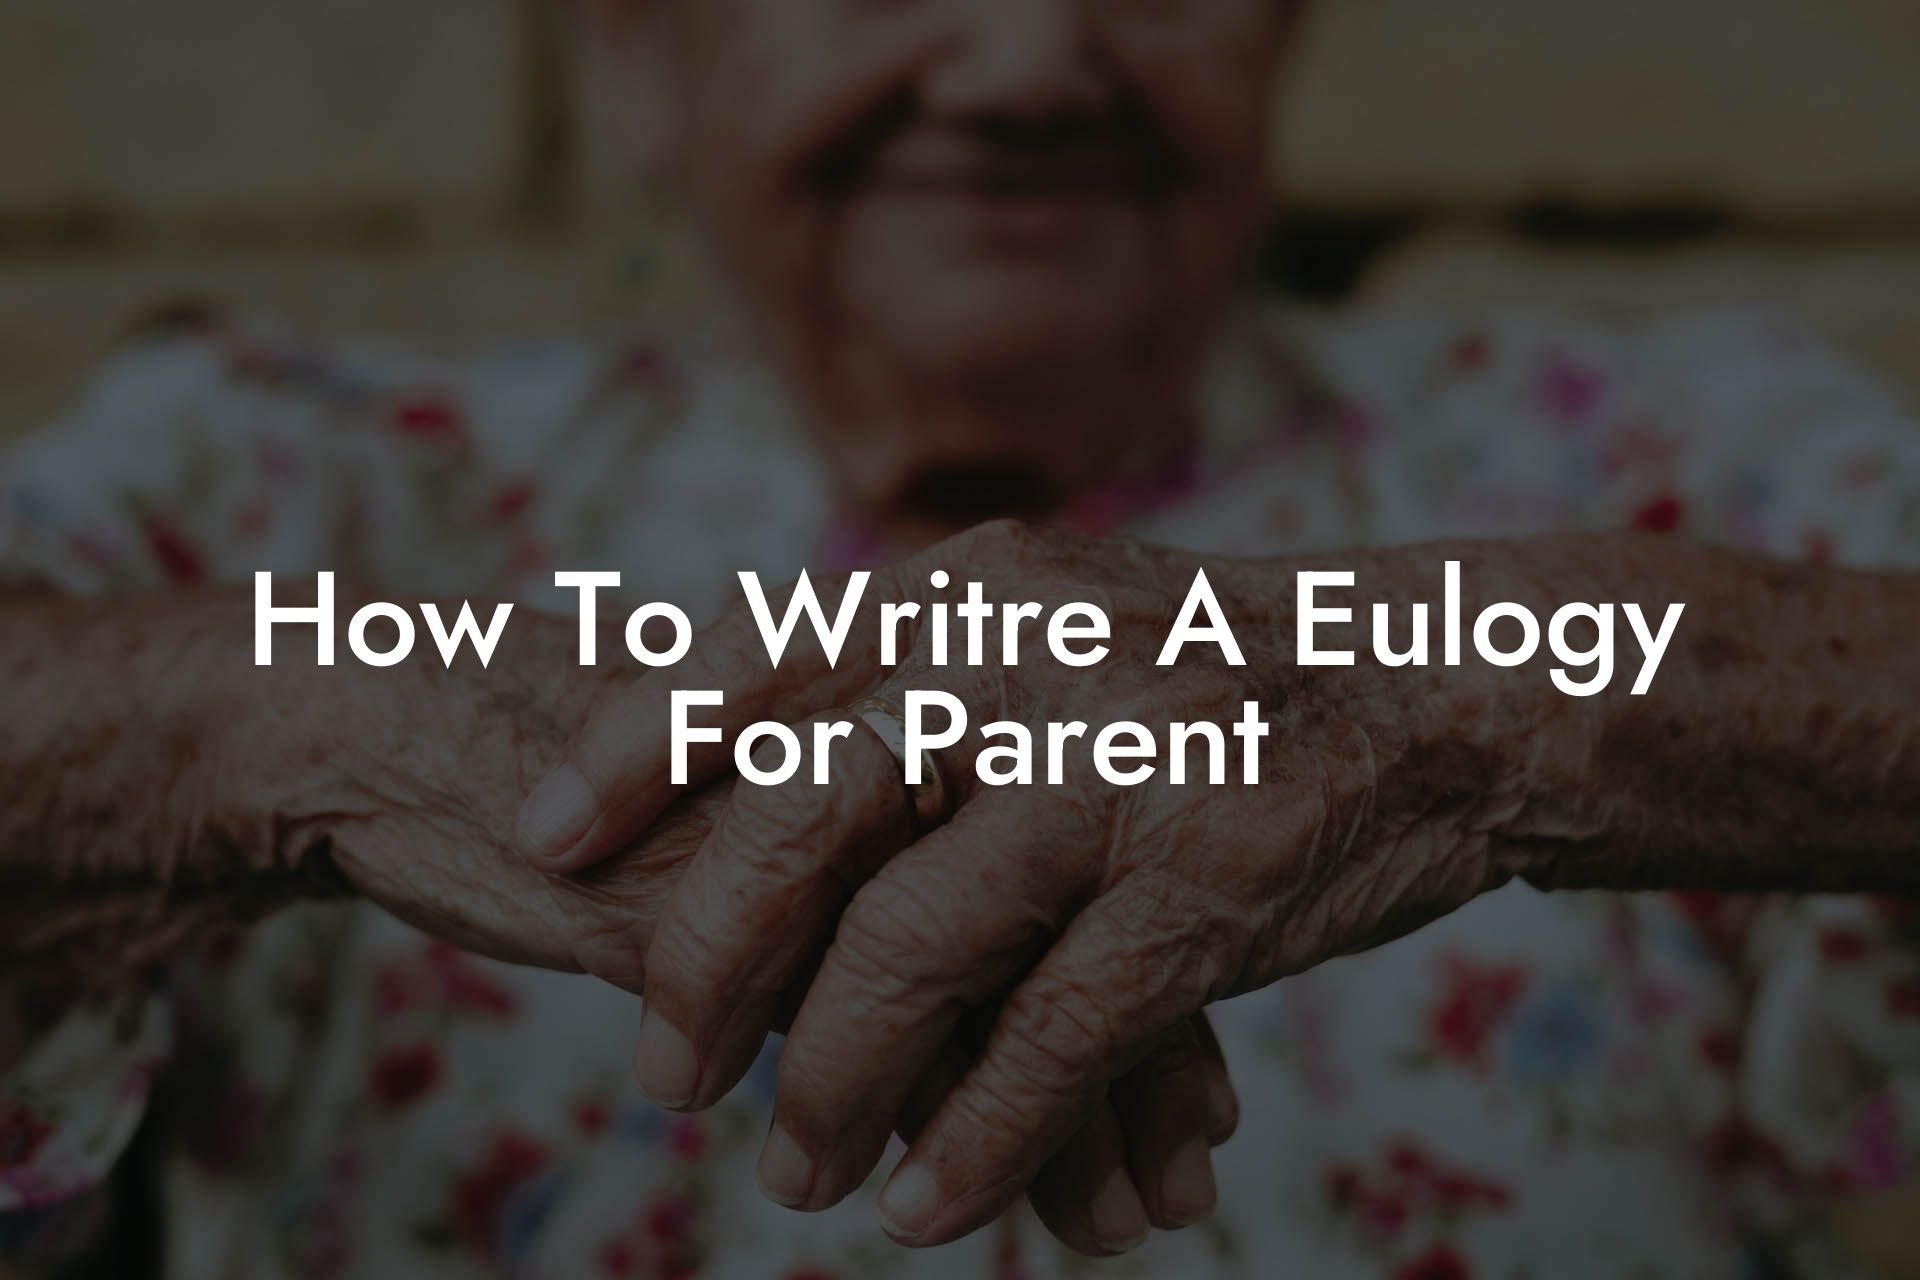 How To Writre A Eulogy For Parent